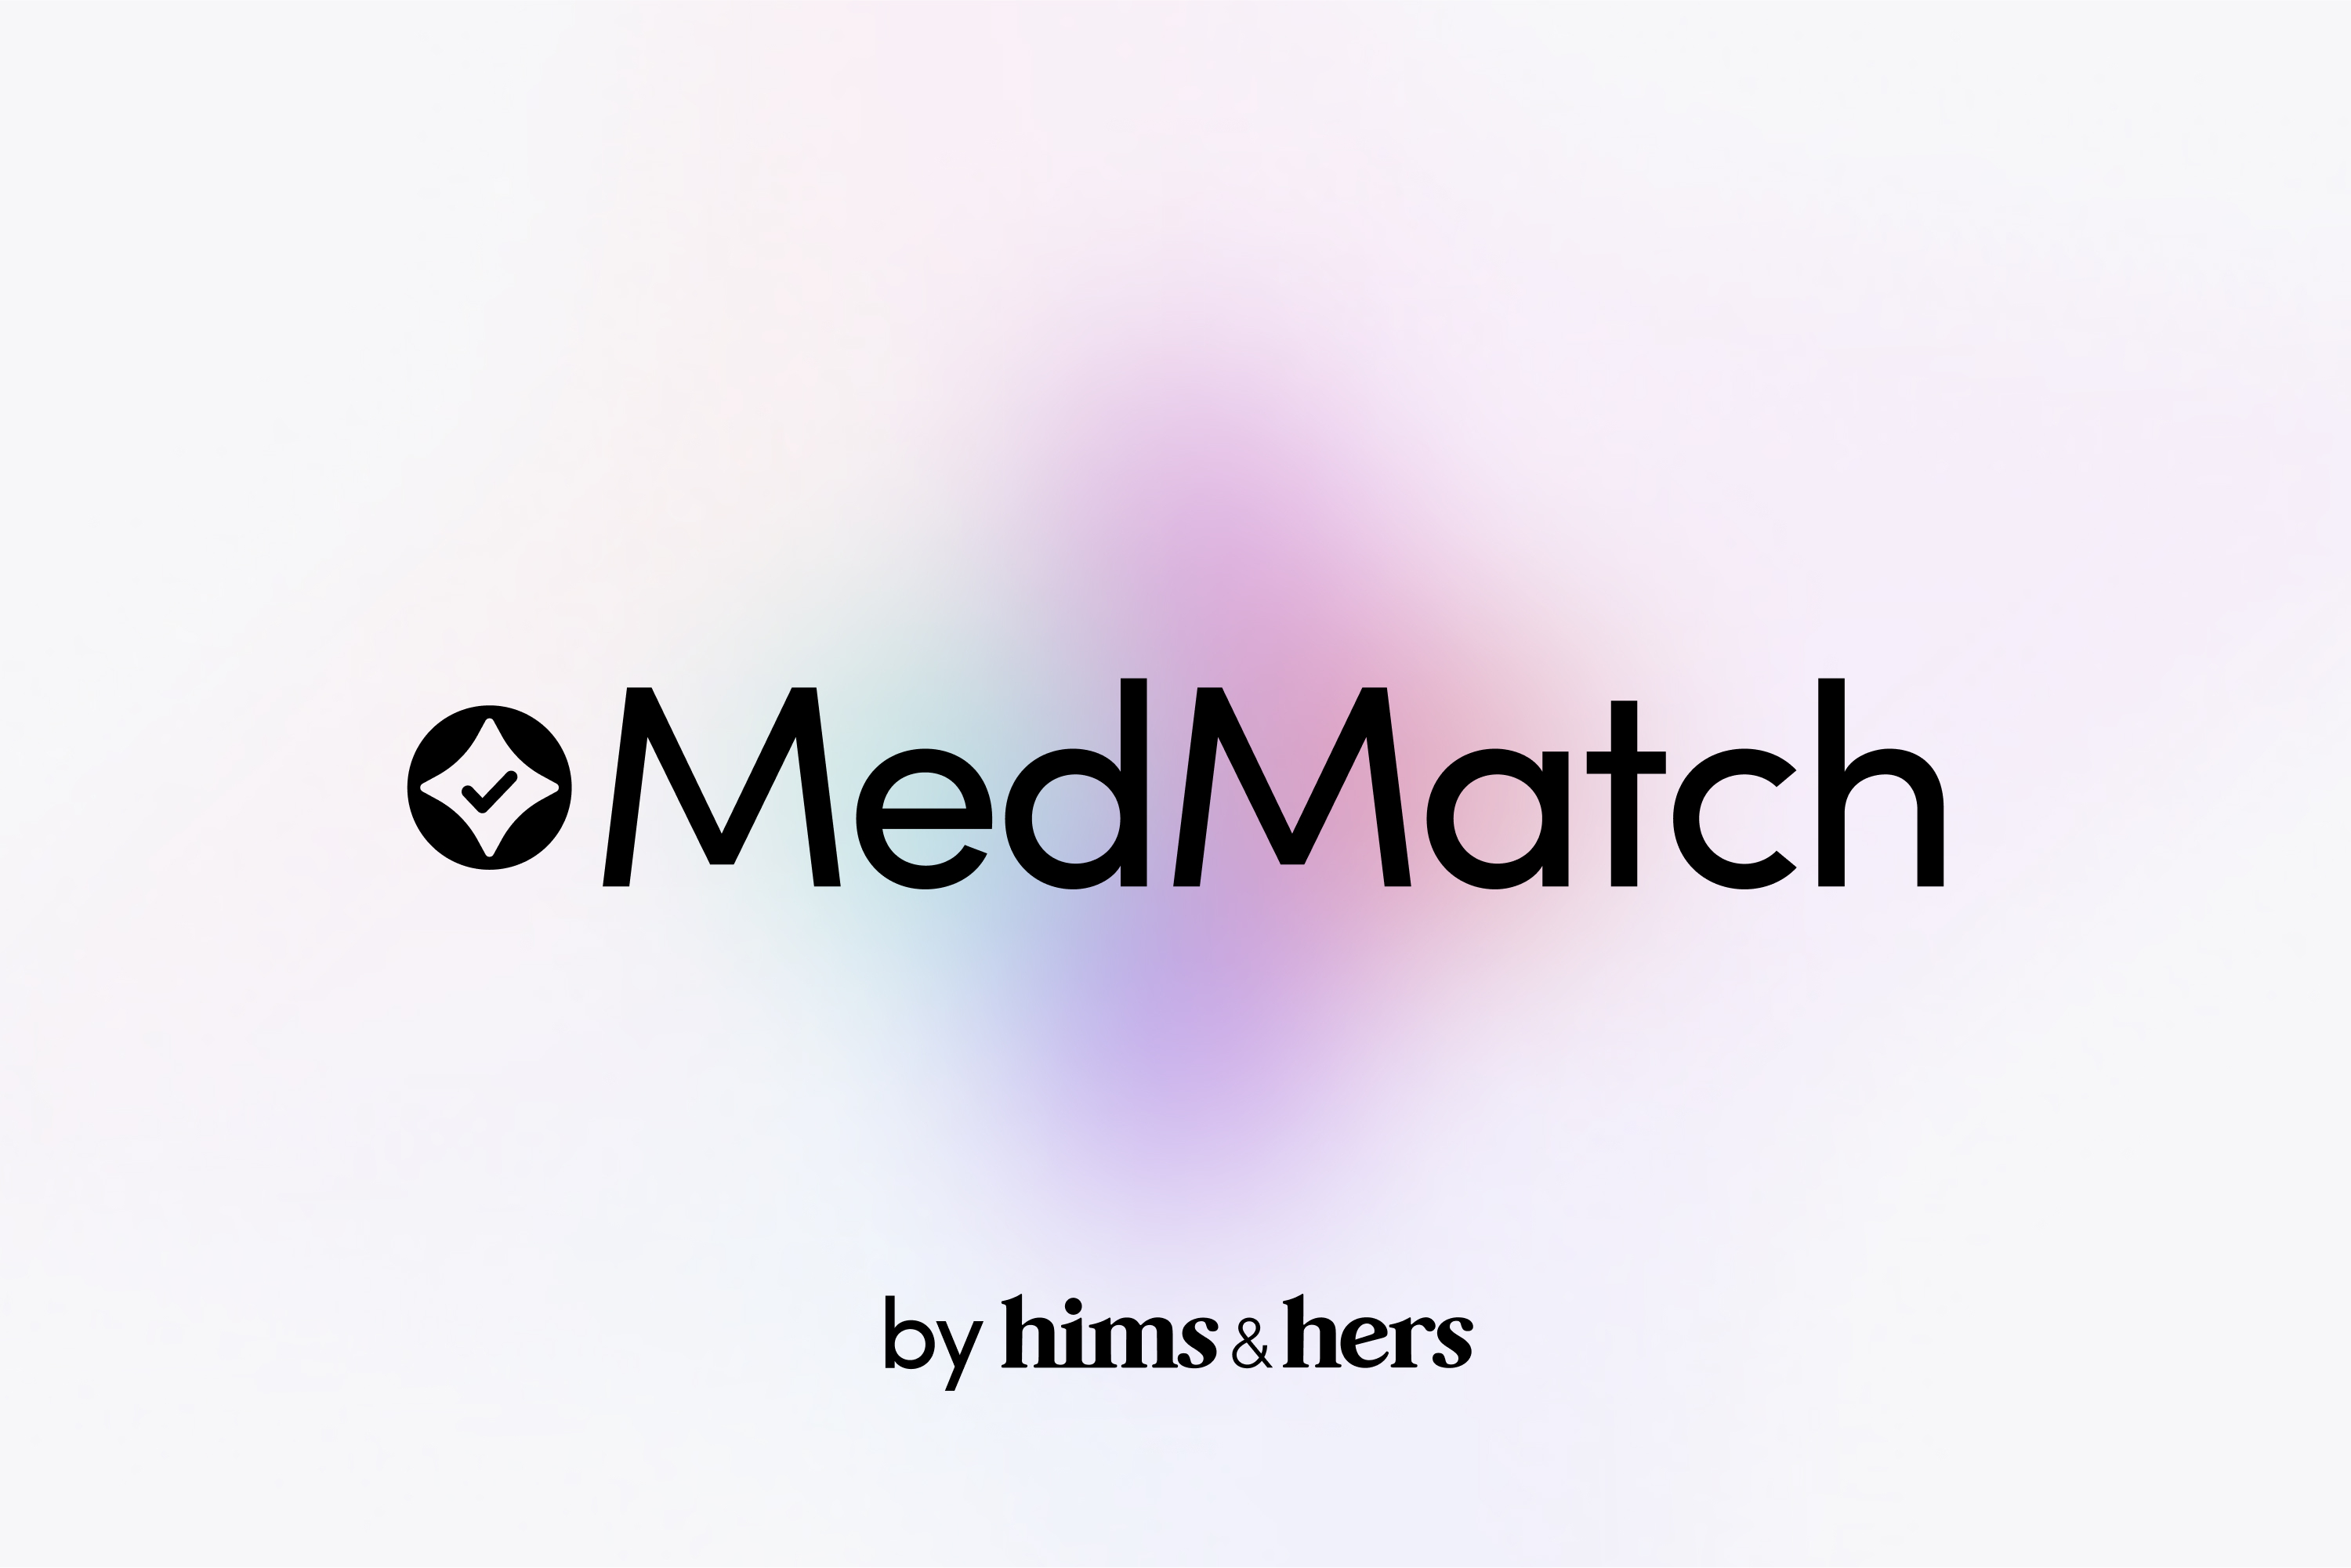 Hims & Hers Introduces MedMatch, The Next Generation of